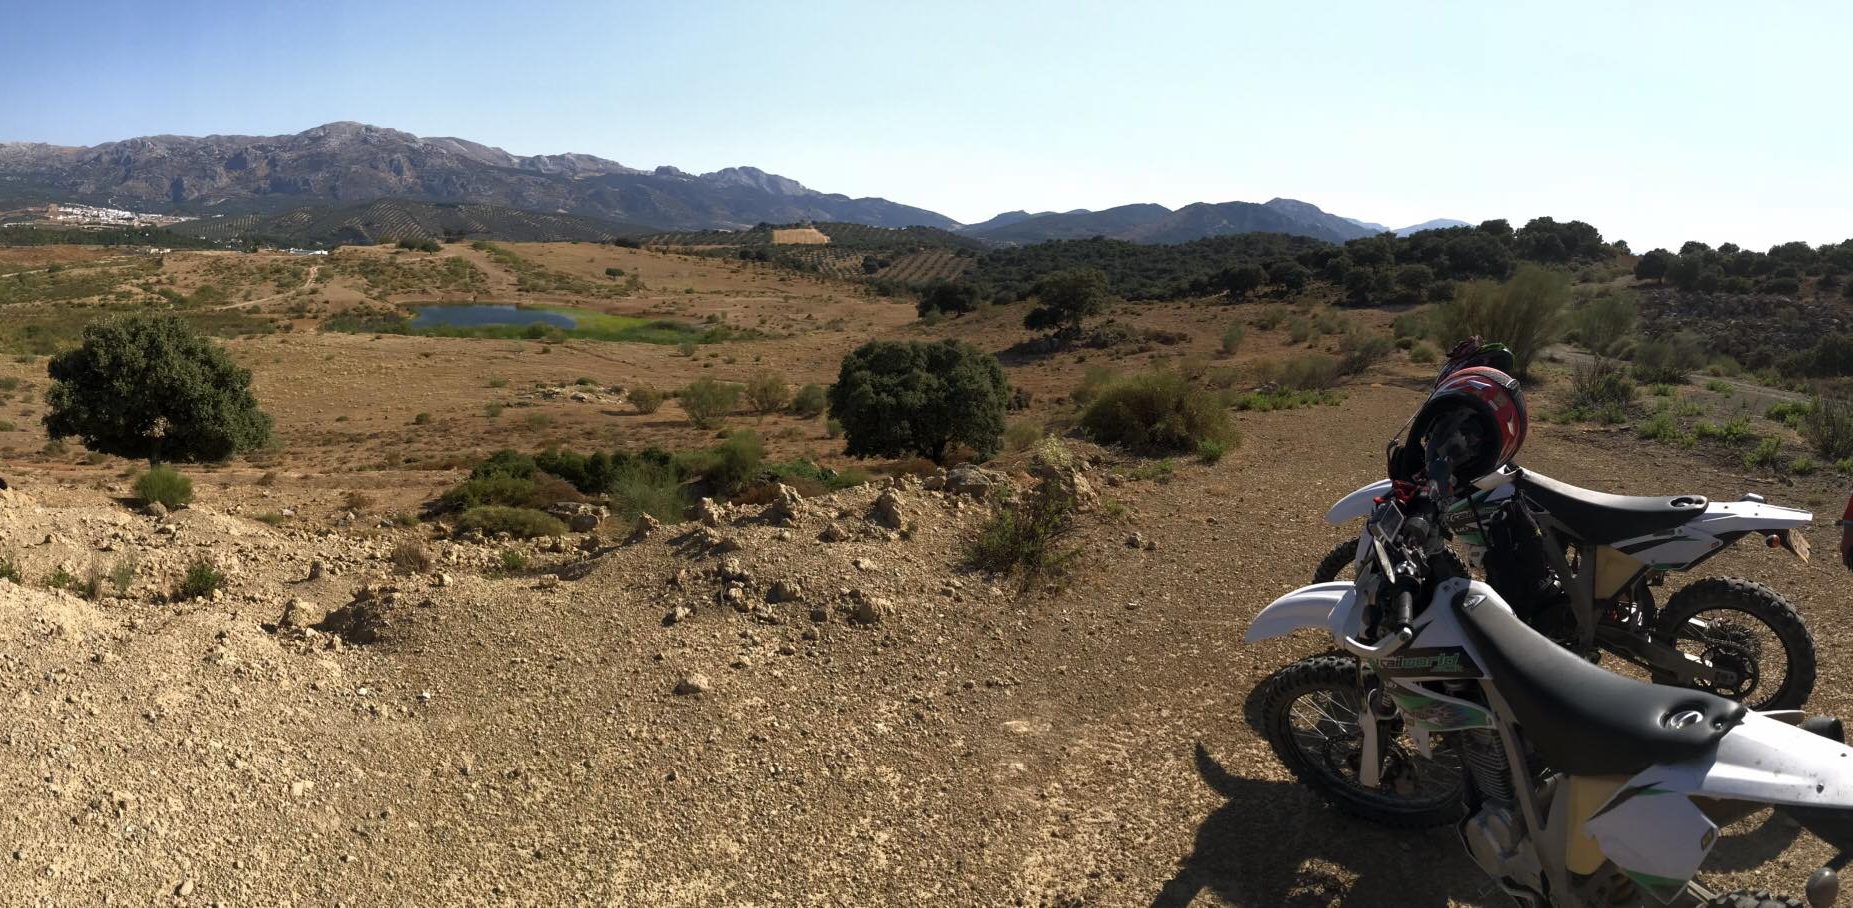 Dirt bike holidays in Spain. Adventure trail riding tours in Spain